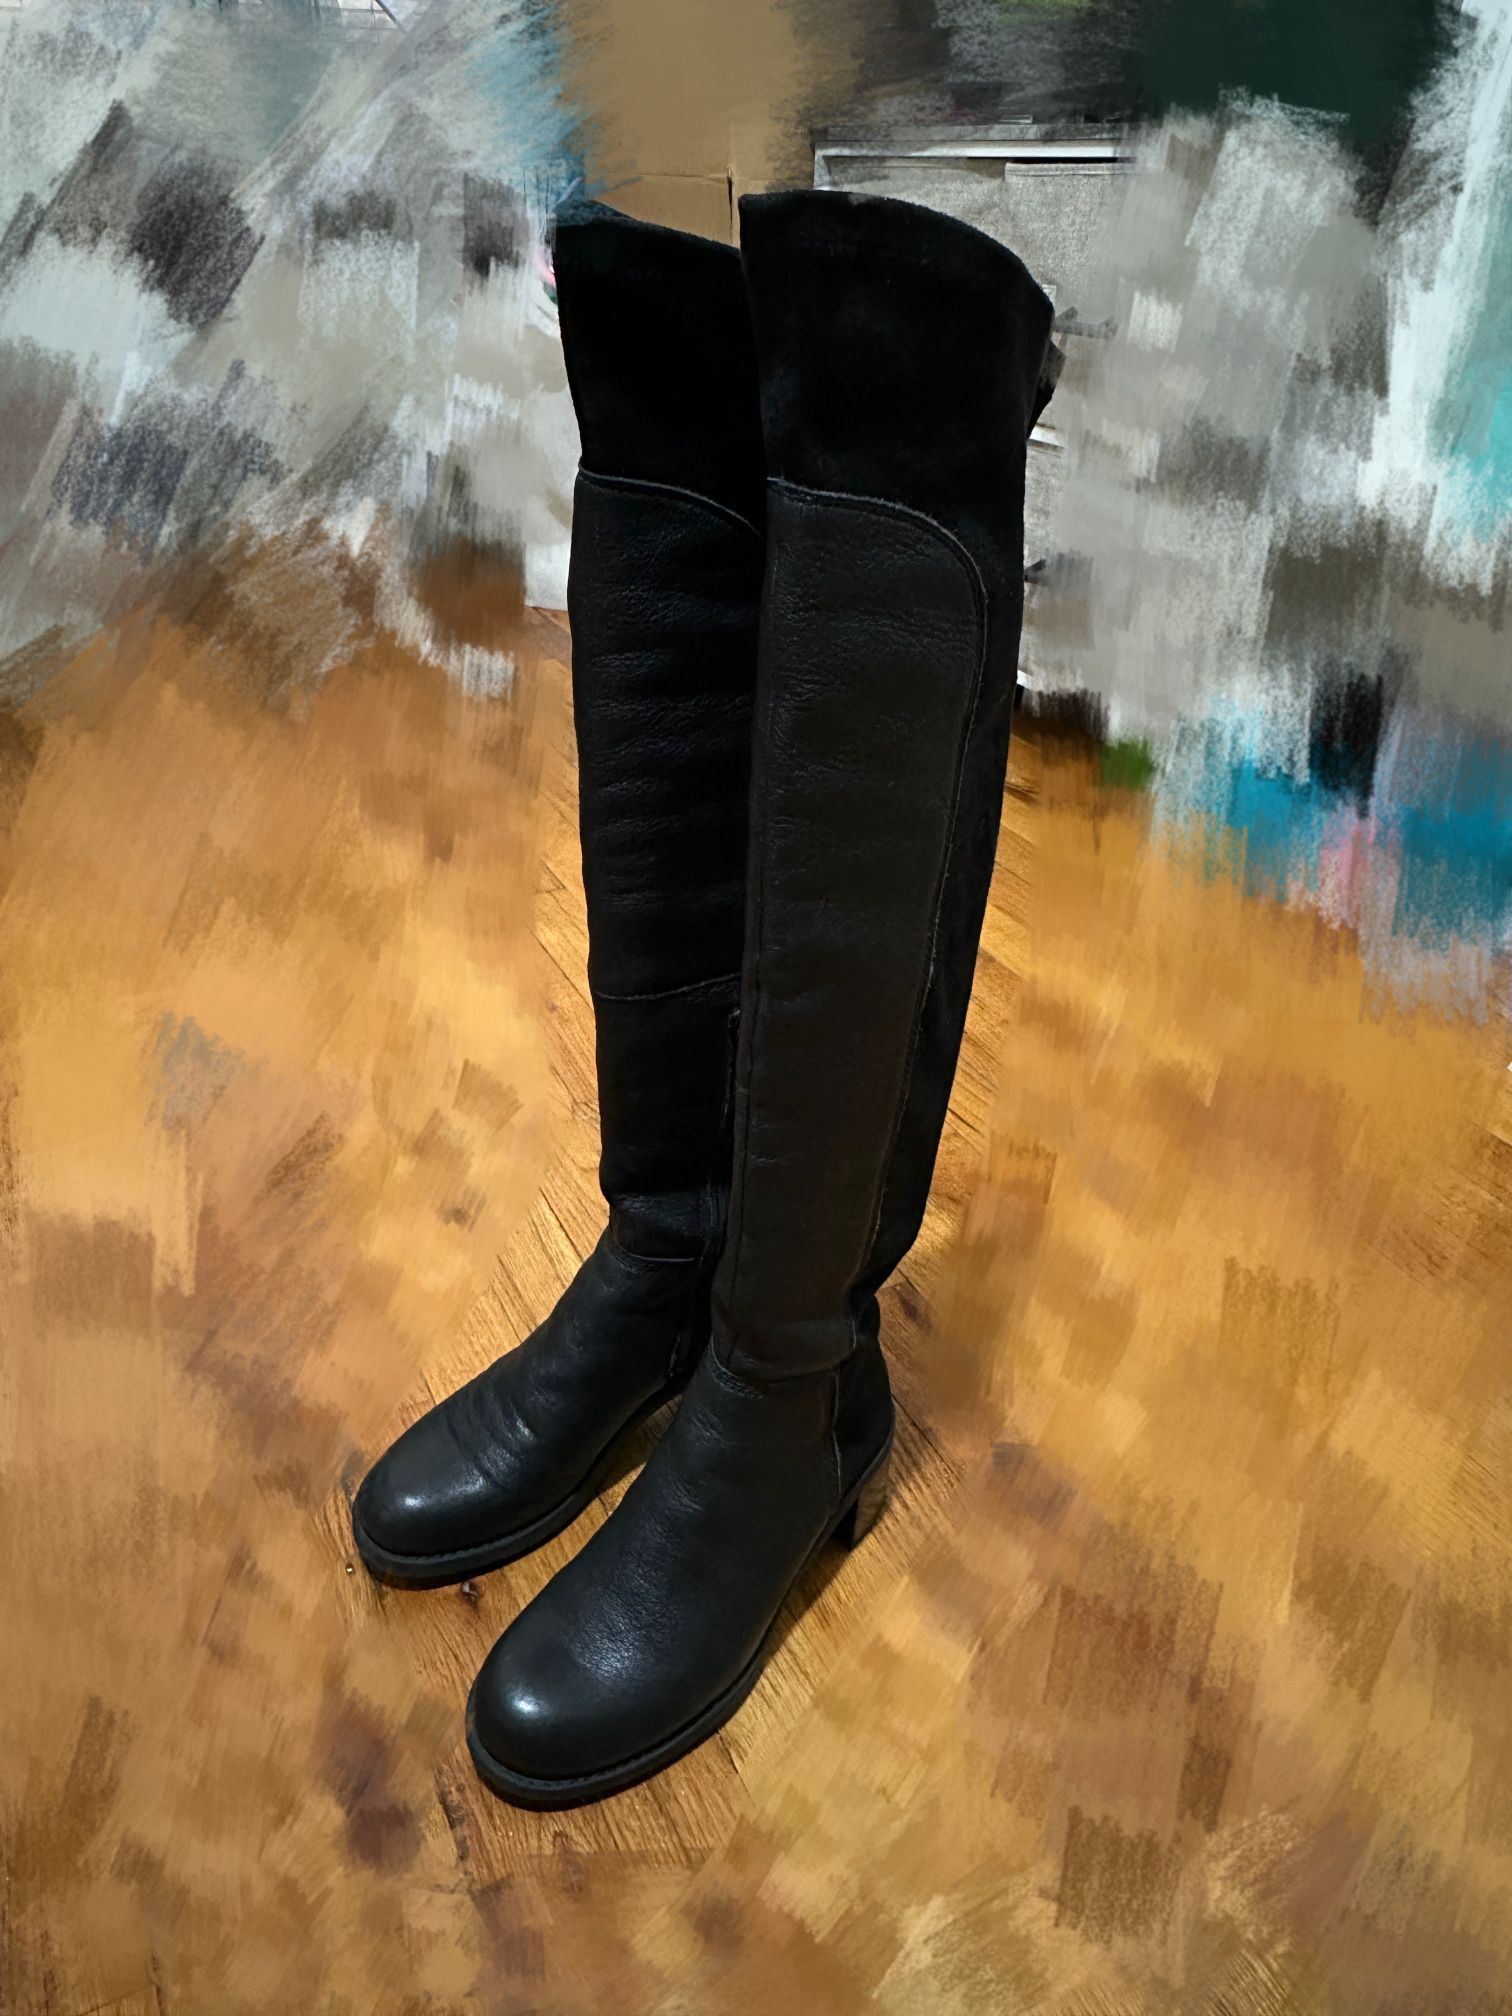 Clarks Leather over-the-knee boots, heel height 5cm, black.